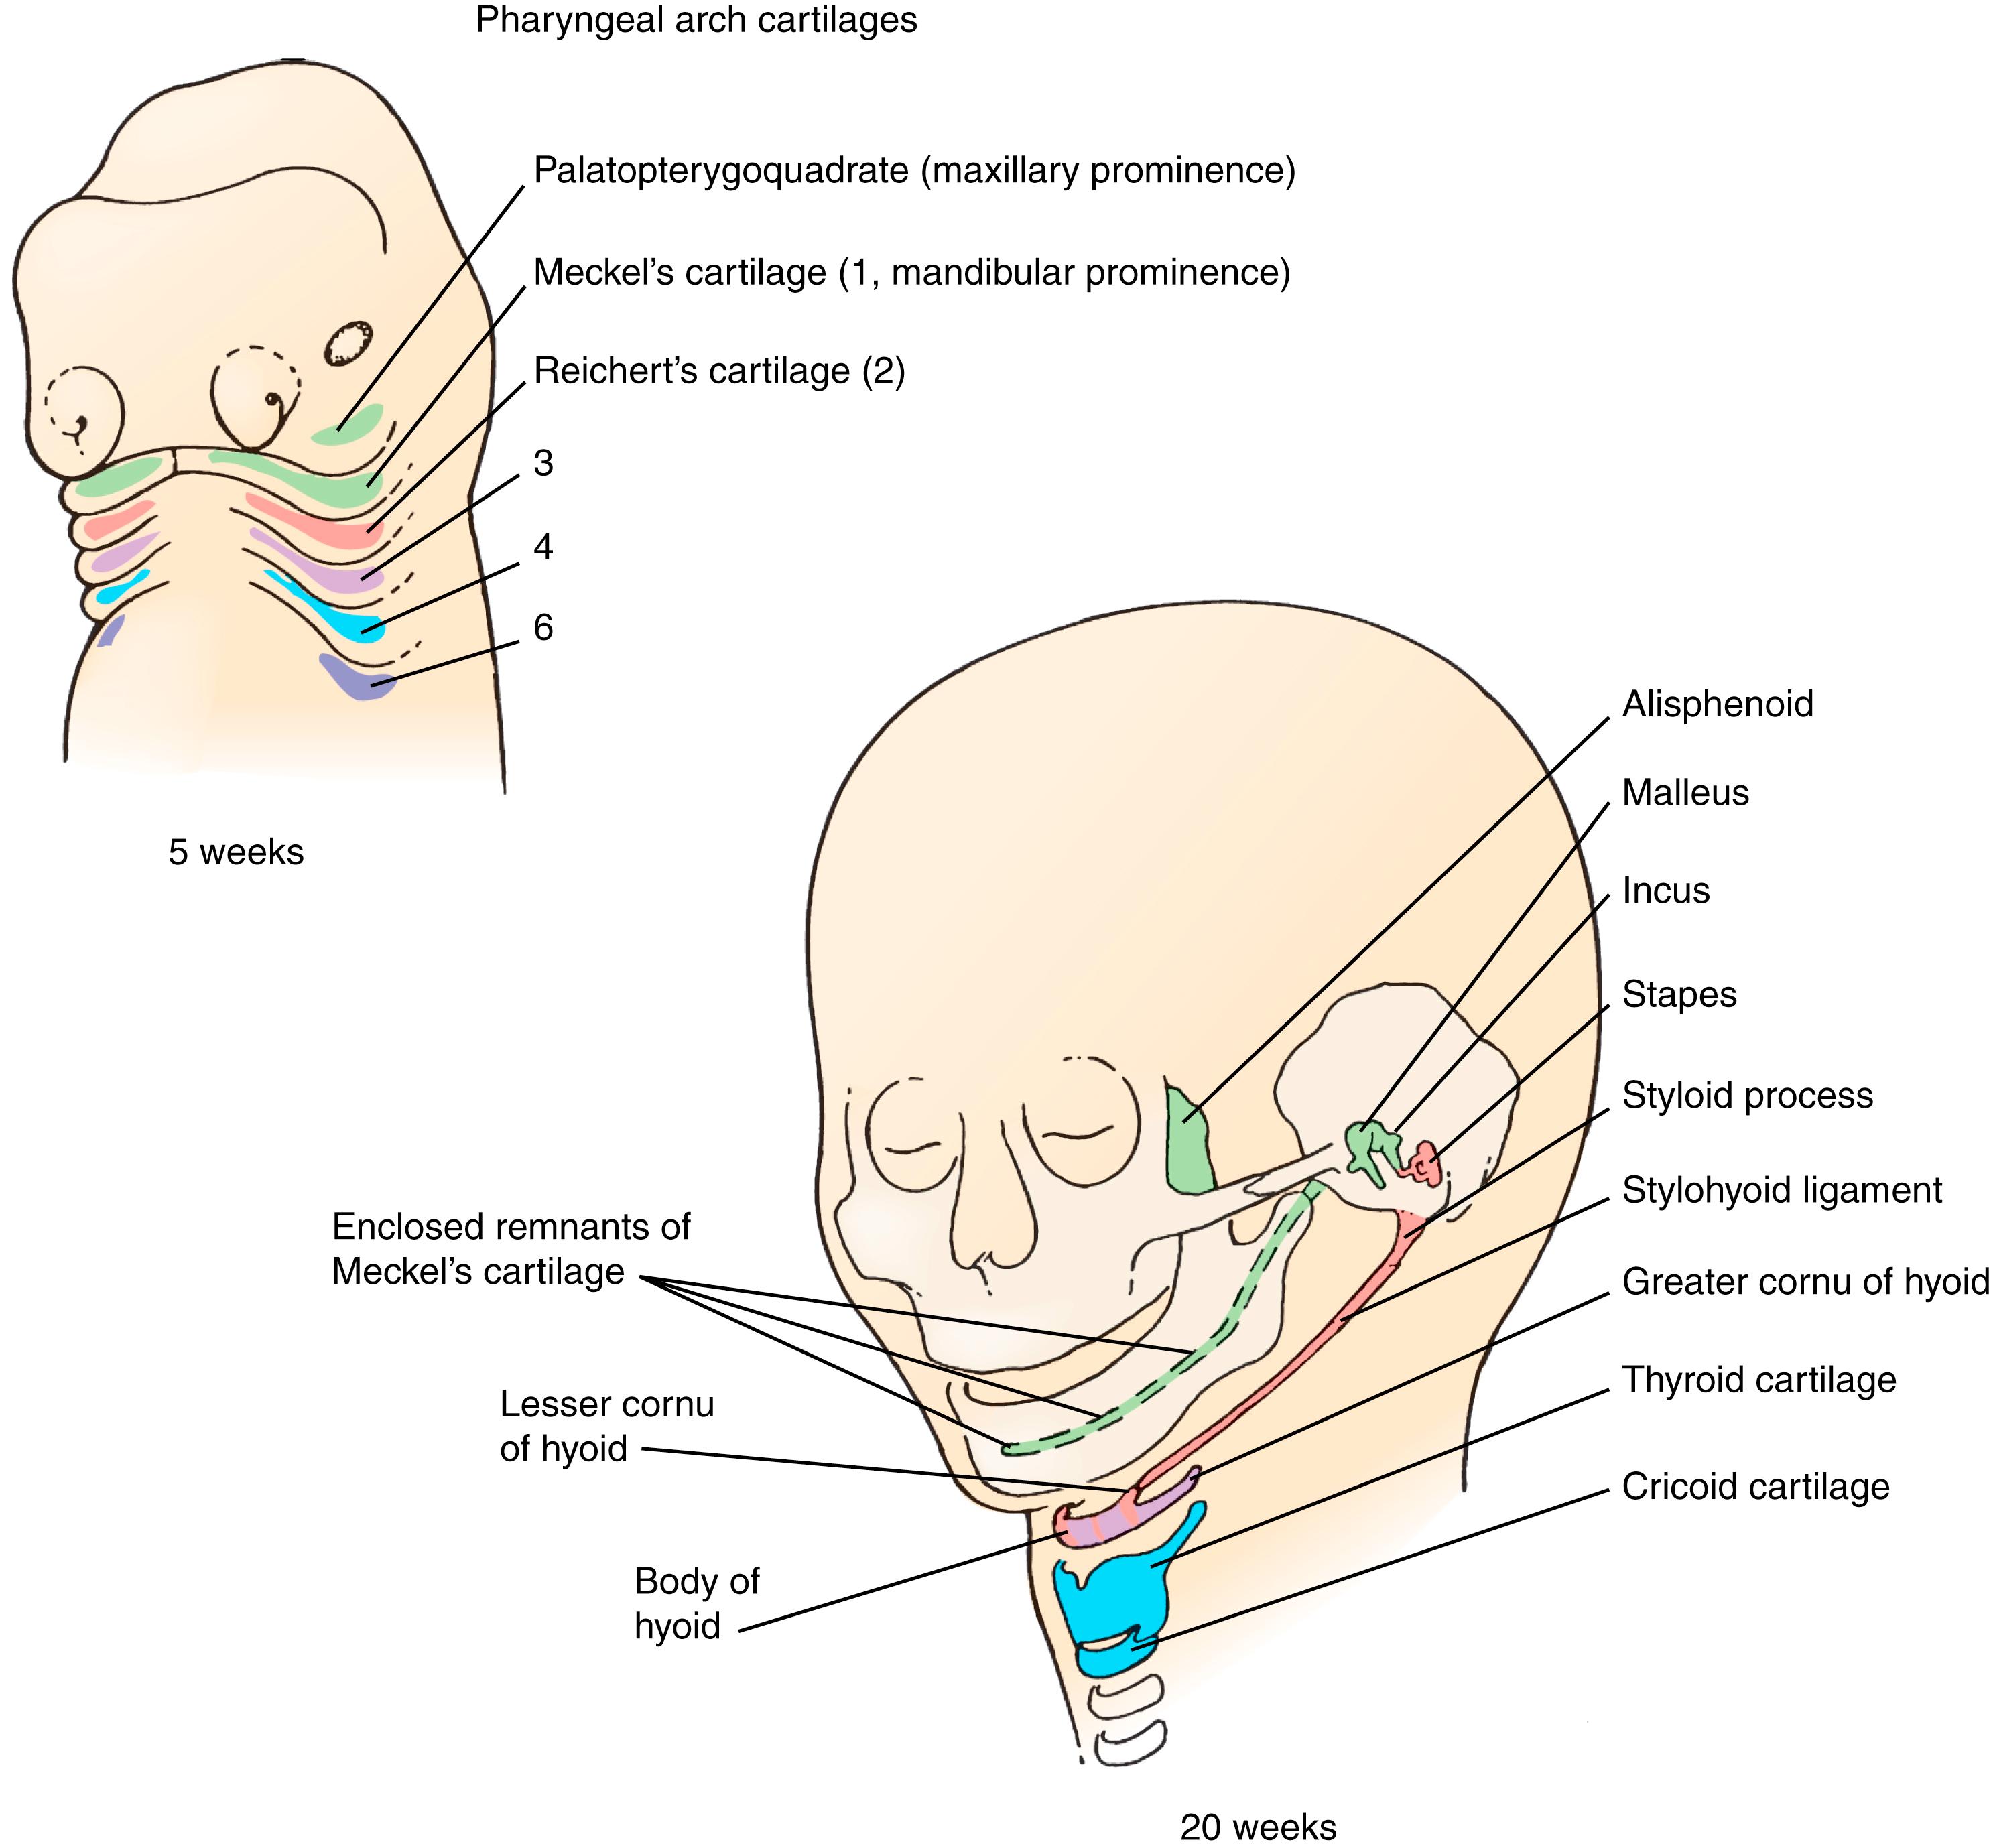 Fig. 23.5, Fate of pharyngeal arch cartilages.